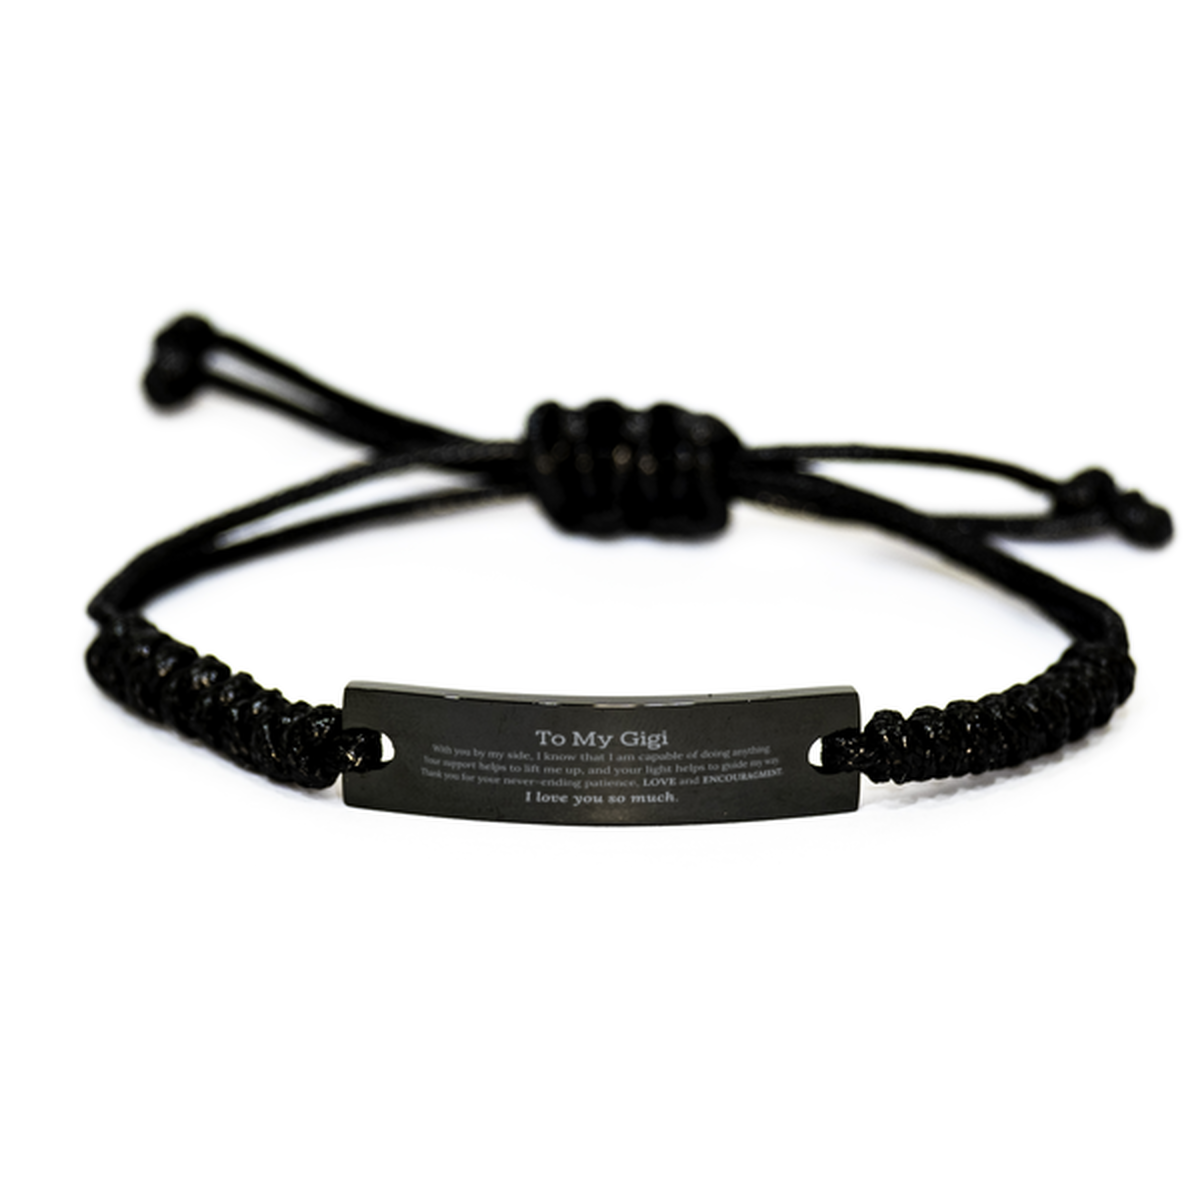 Appreciation Gigi Black Rope Bracelet Gifts, To My Gigi Birthday Christmas Wedding Keepsake Gifts for Gigi With you by my side, I know that I am capable of doing anything. I love you so much